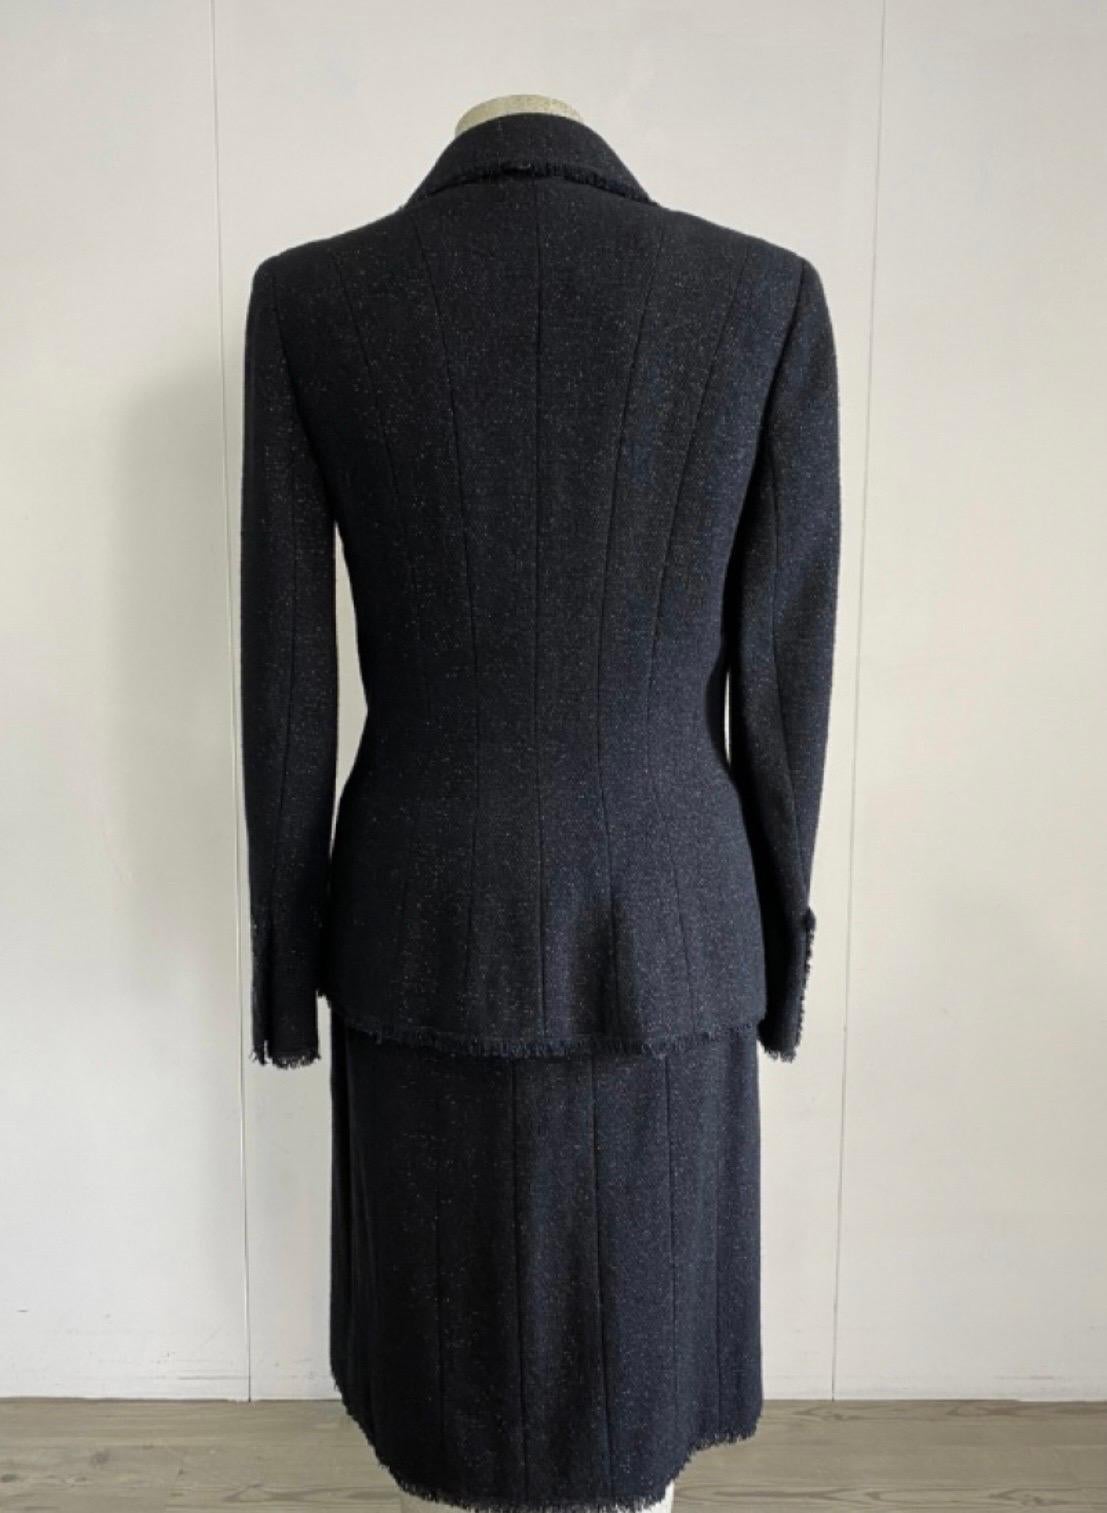 Chanel black wool Jacket and Skirt Suit In Excellent Condition For Sale In Carnate, IT